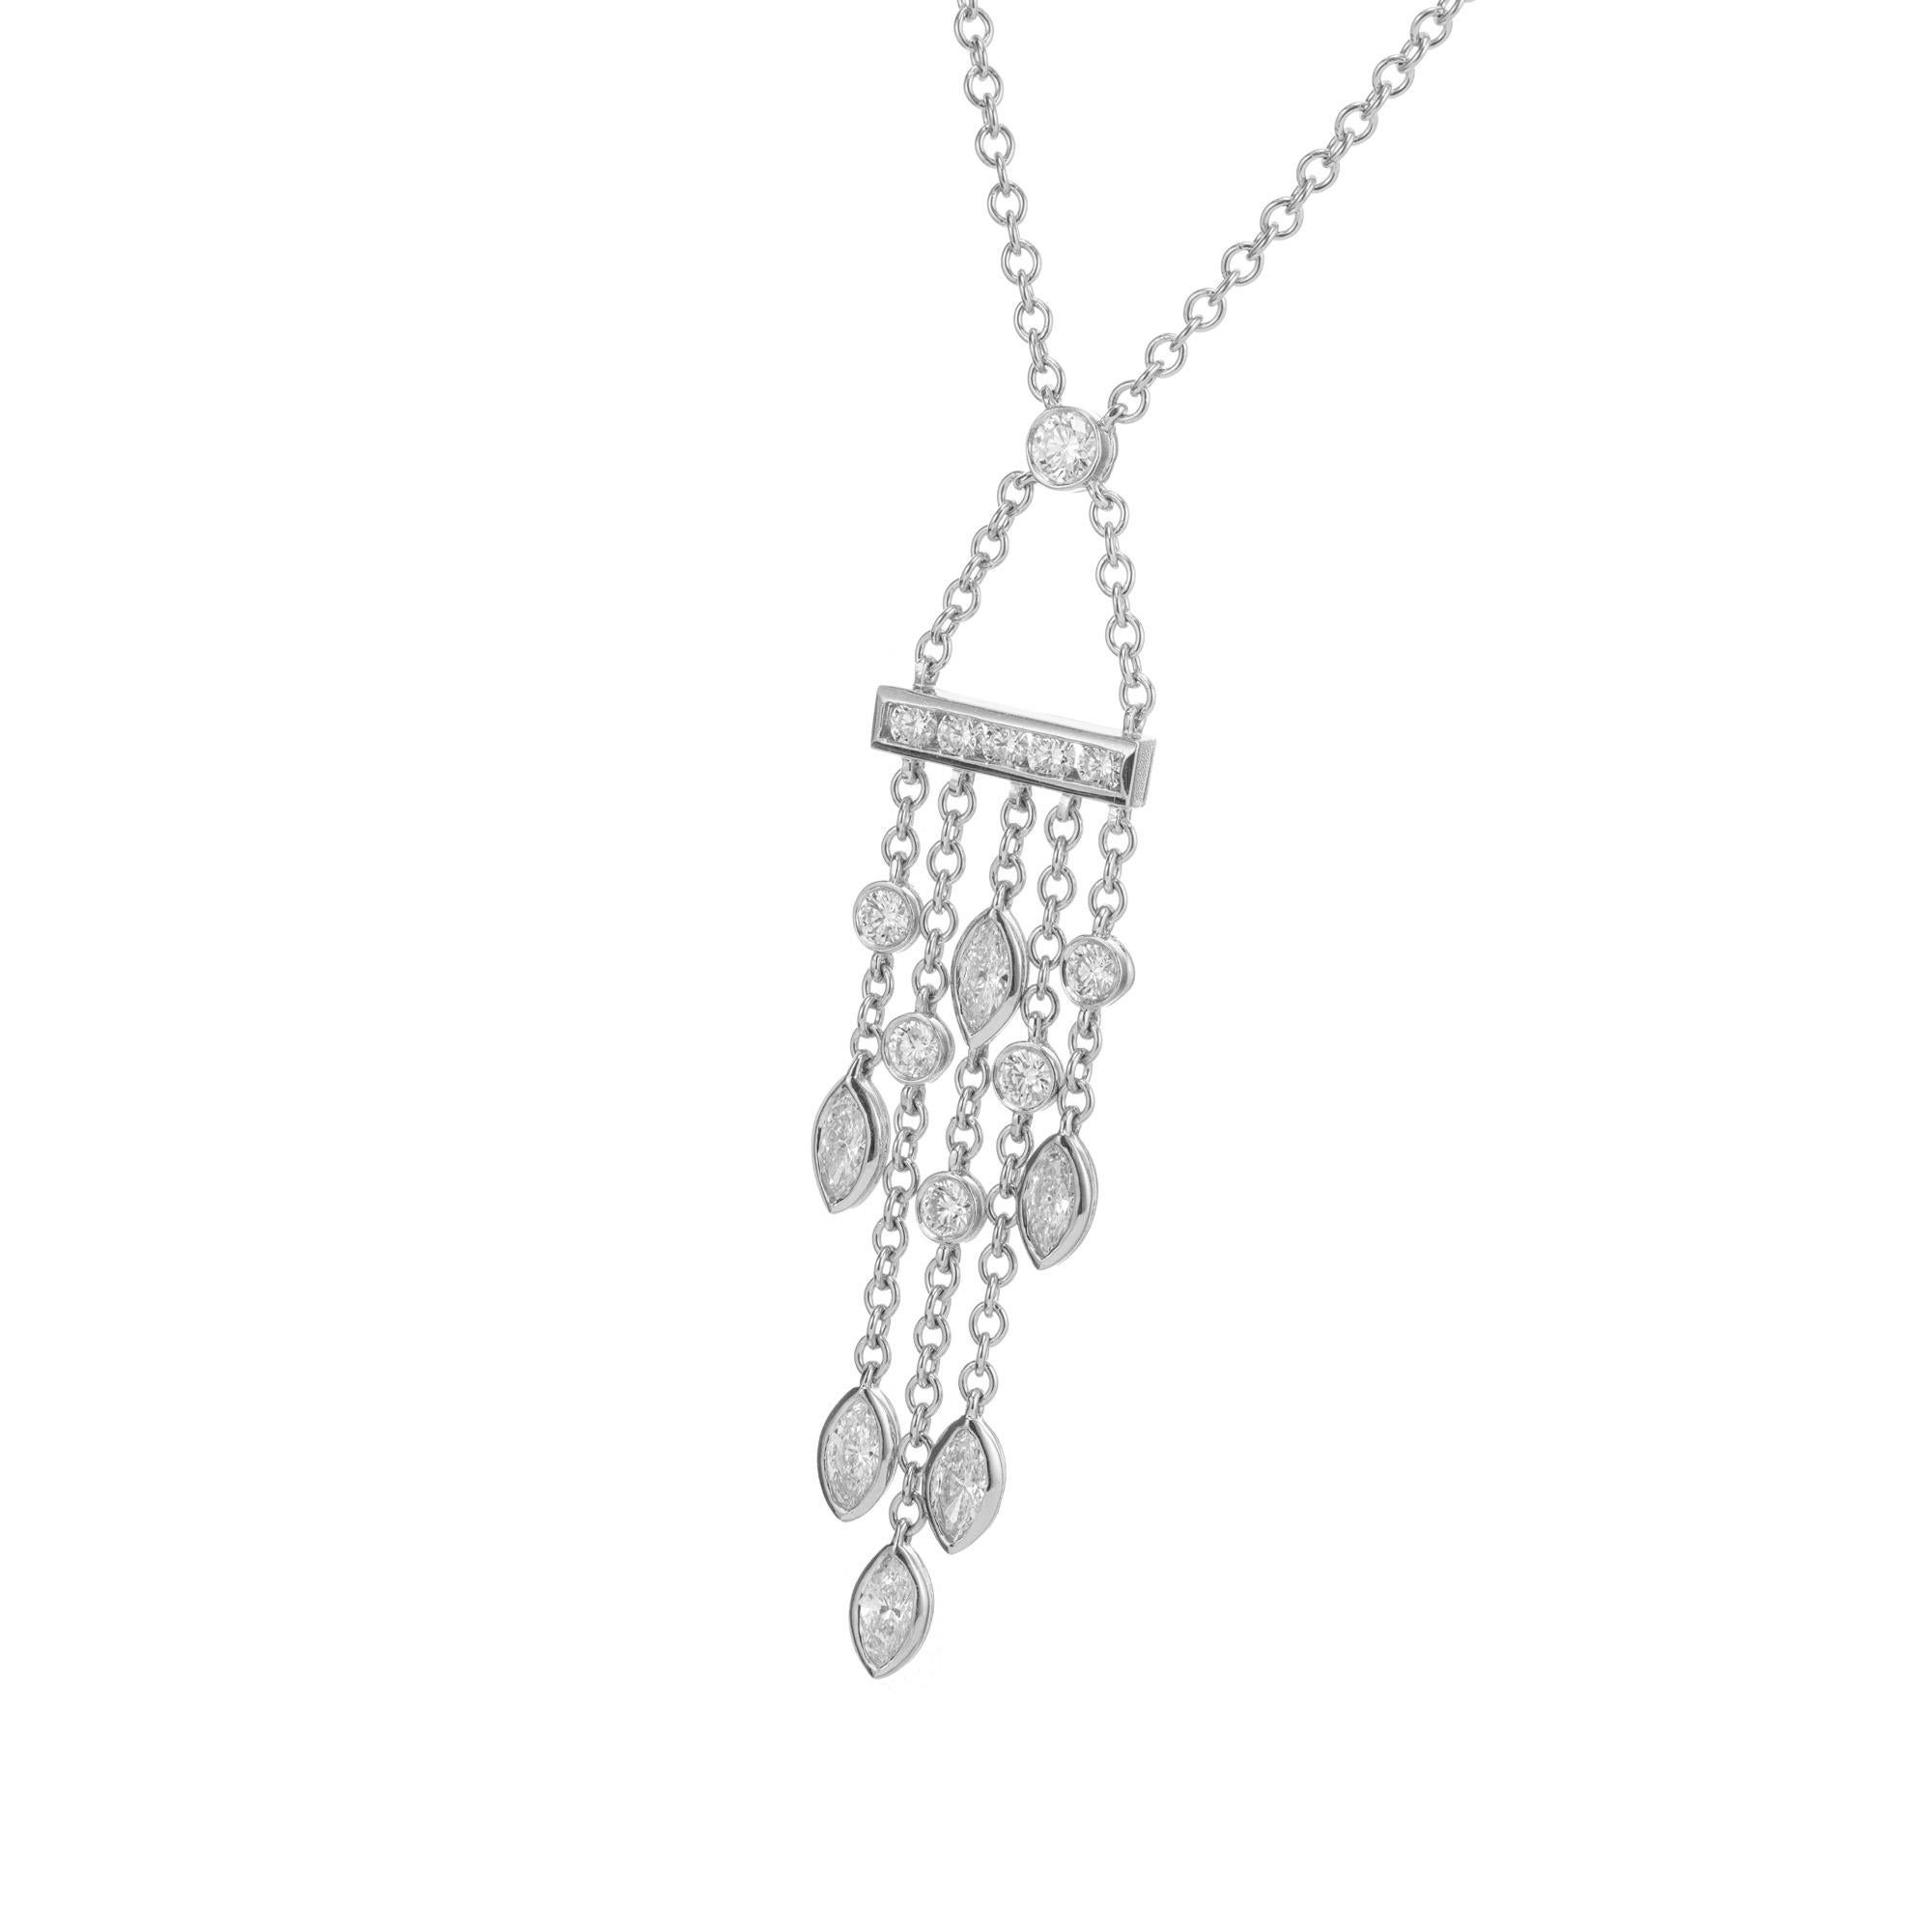 Tiffany & Co diamond pendant. 17 Marquise and round diamond dangles set in a platinum swing drop setting. 16 inch chain. length does not include pendant.

17 Marquise and round diamonds, approx. total weight .99cts, F, VS
Tiffany & Co cable chain: